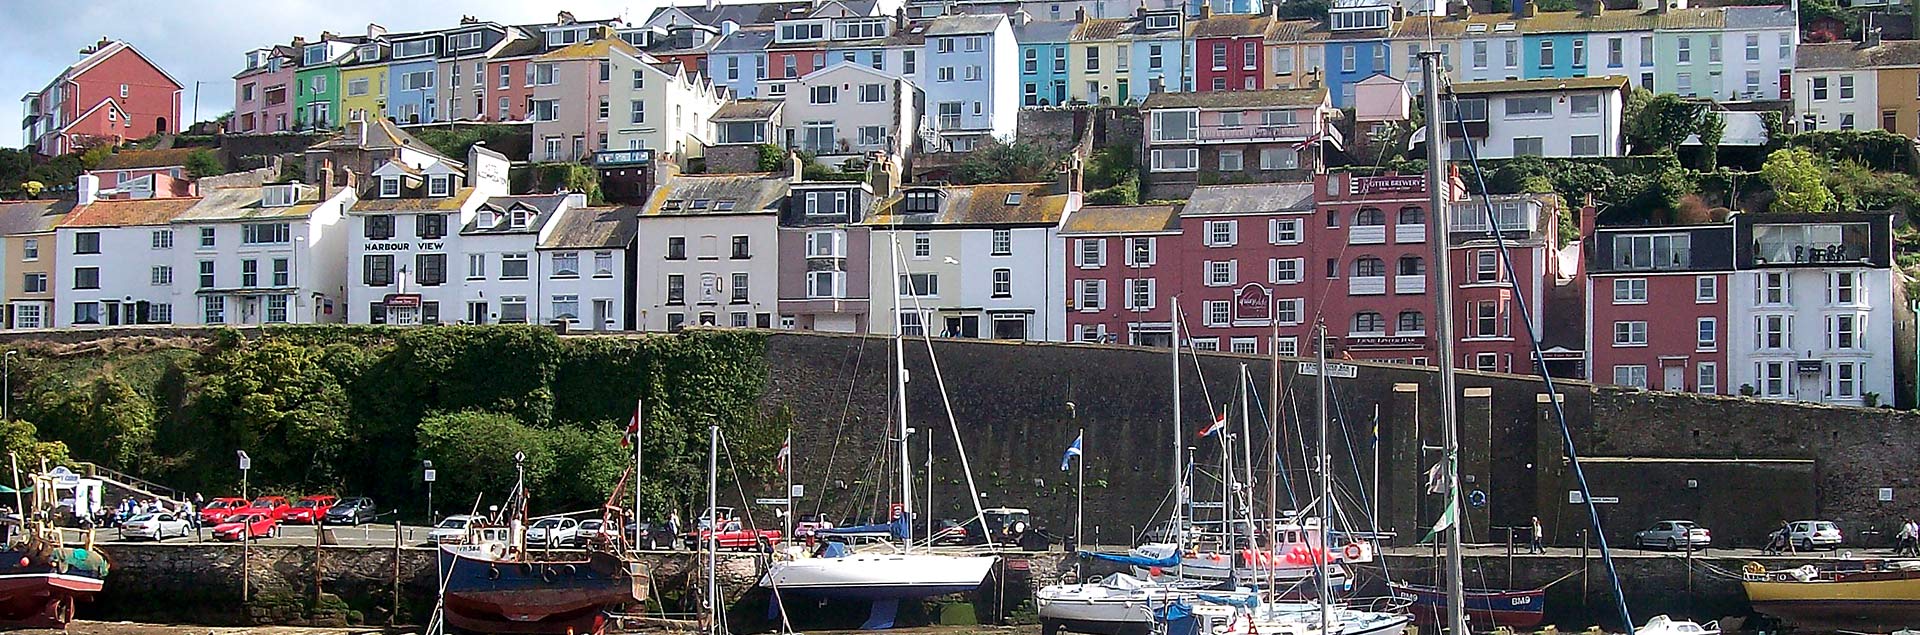 Things to do in Brixham